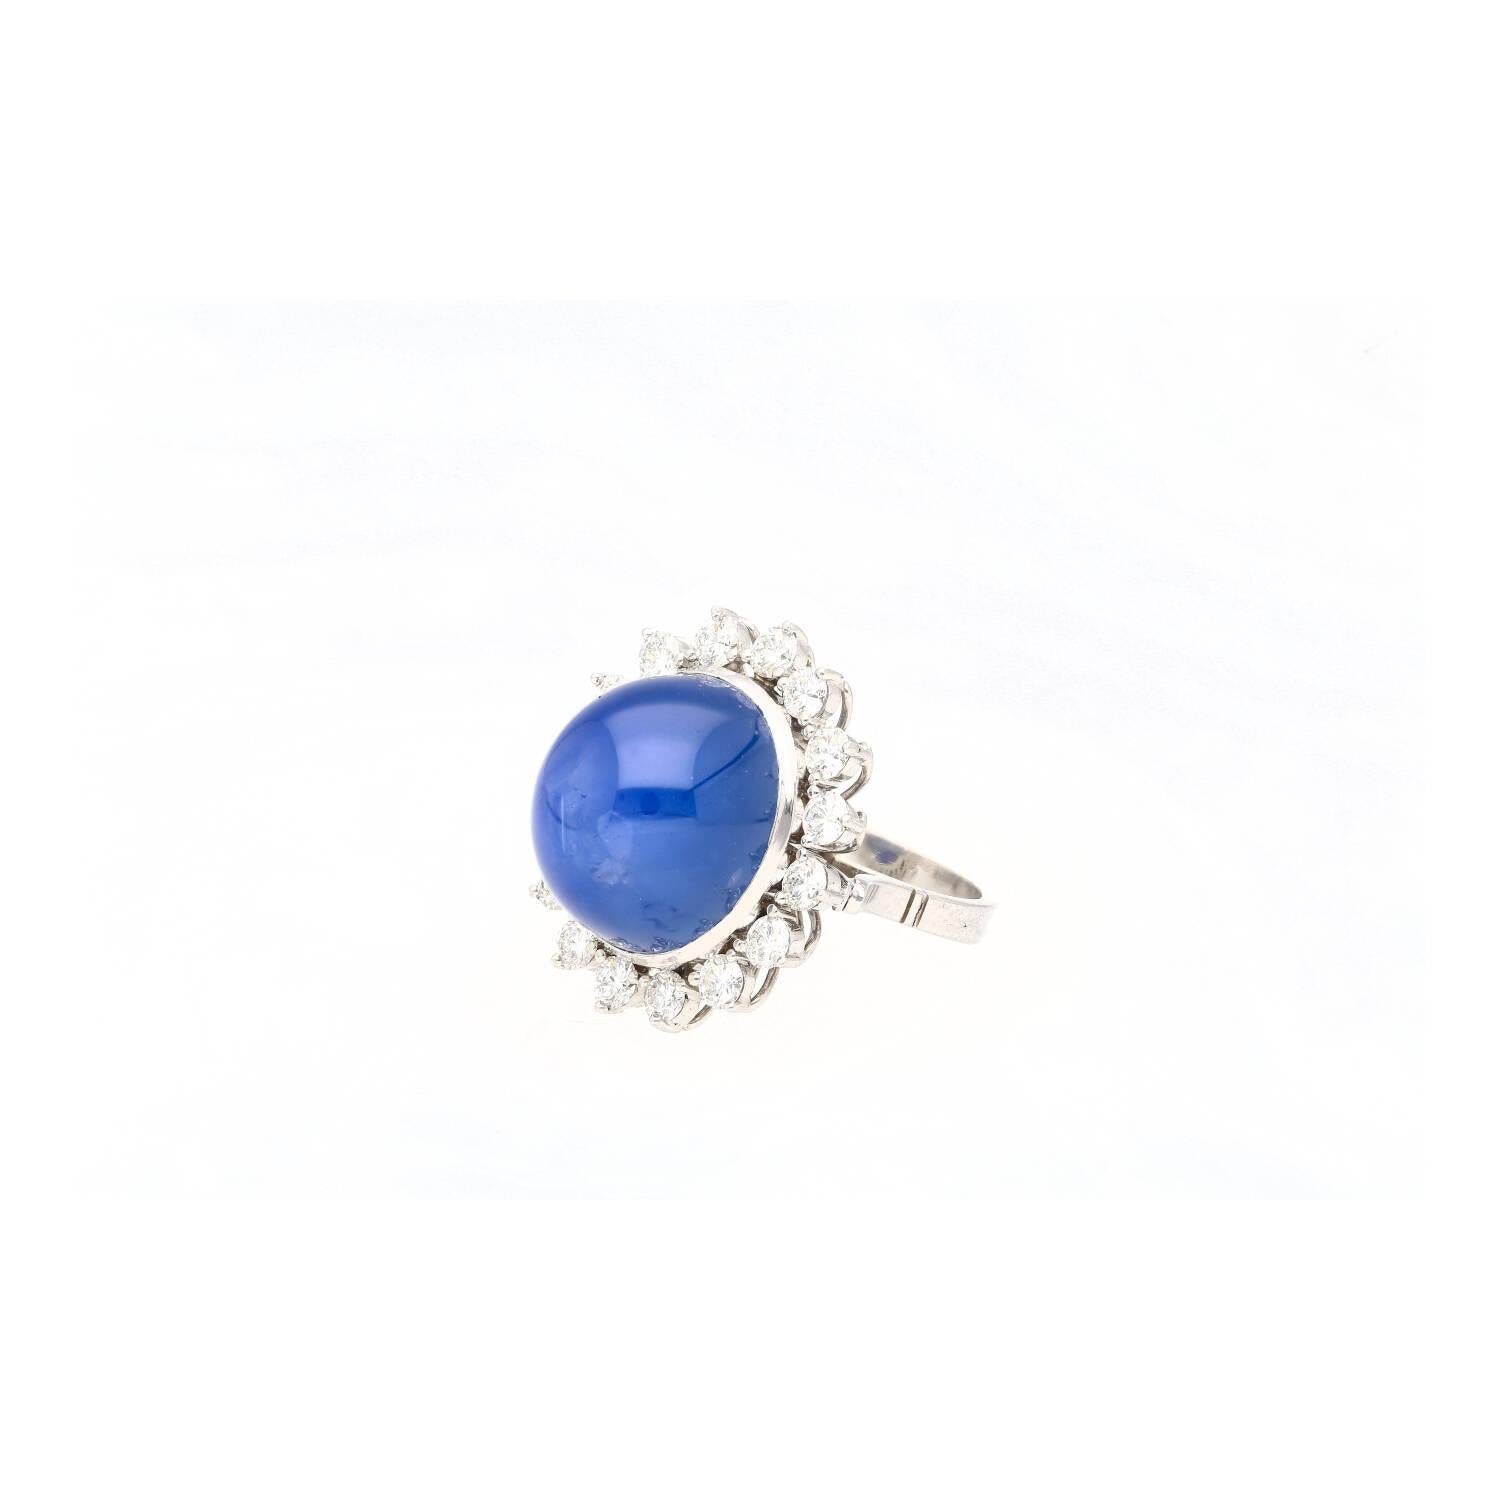 Natural 30 Carat no Heat Ceylon Blue Star Sapphire & Diamond Ring In Platinum

This unheated star sapphire ring boasts a 30 carat natural blue sapphire center stone with cabochon-oval-cut and a total weight of 30 carats. Originating from Ceylon, Sri